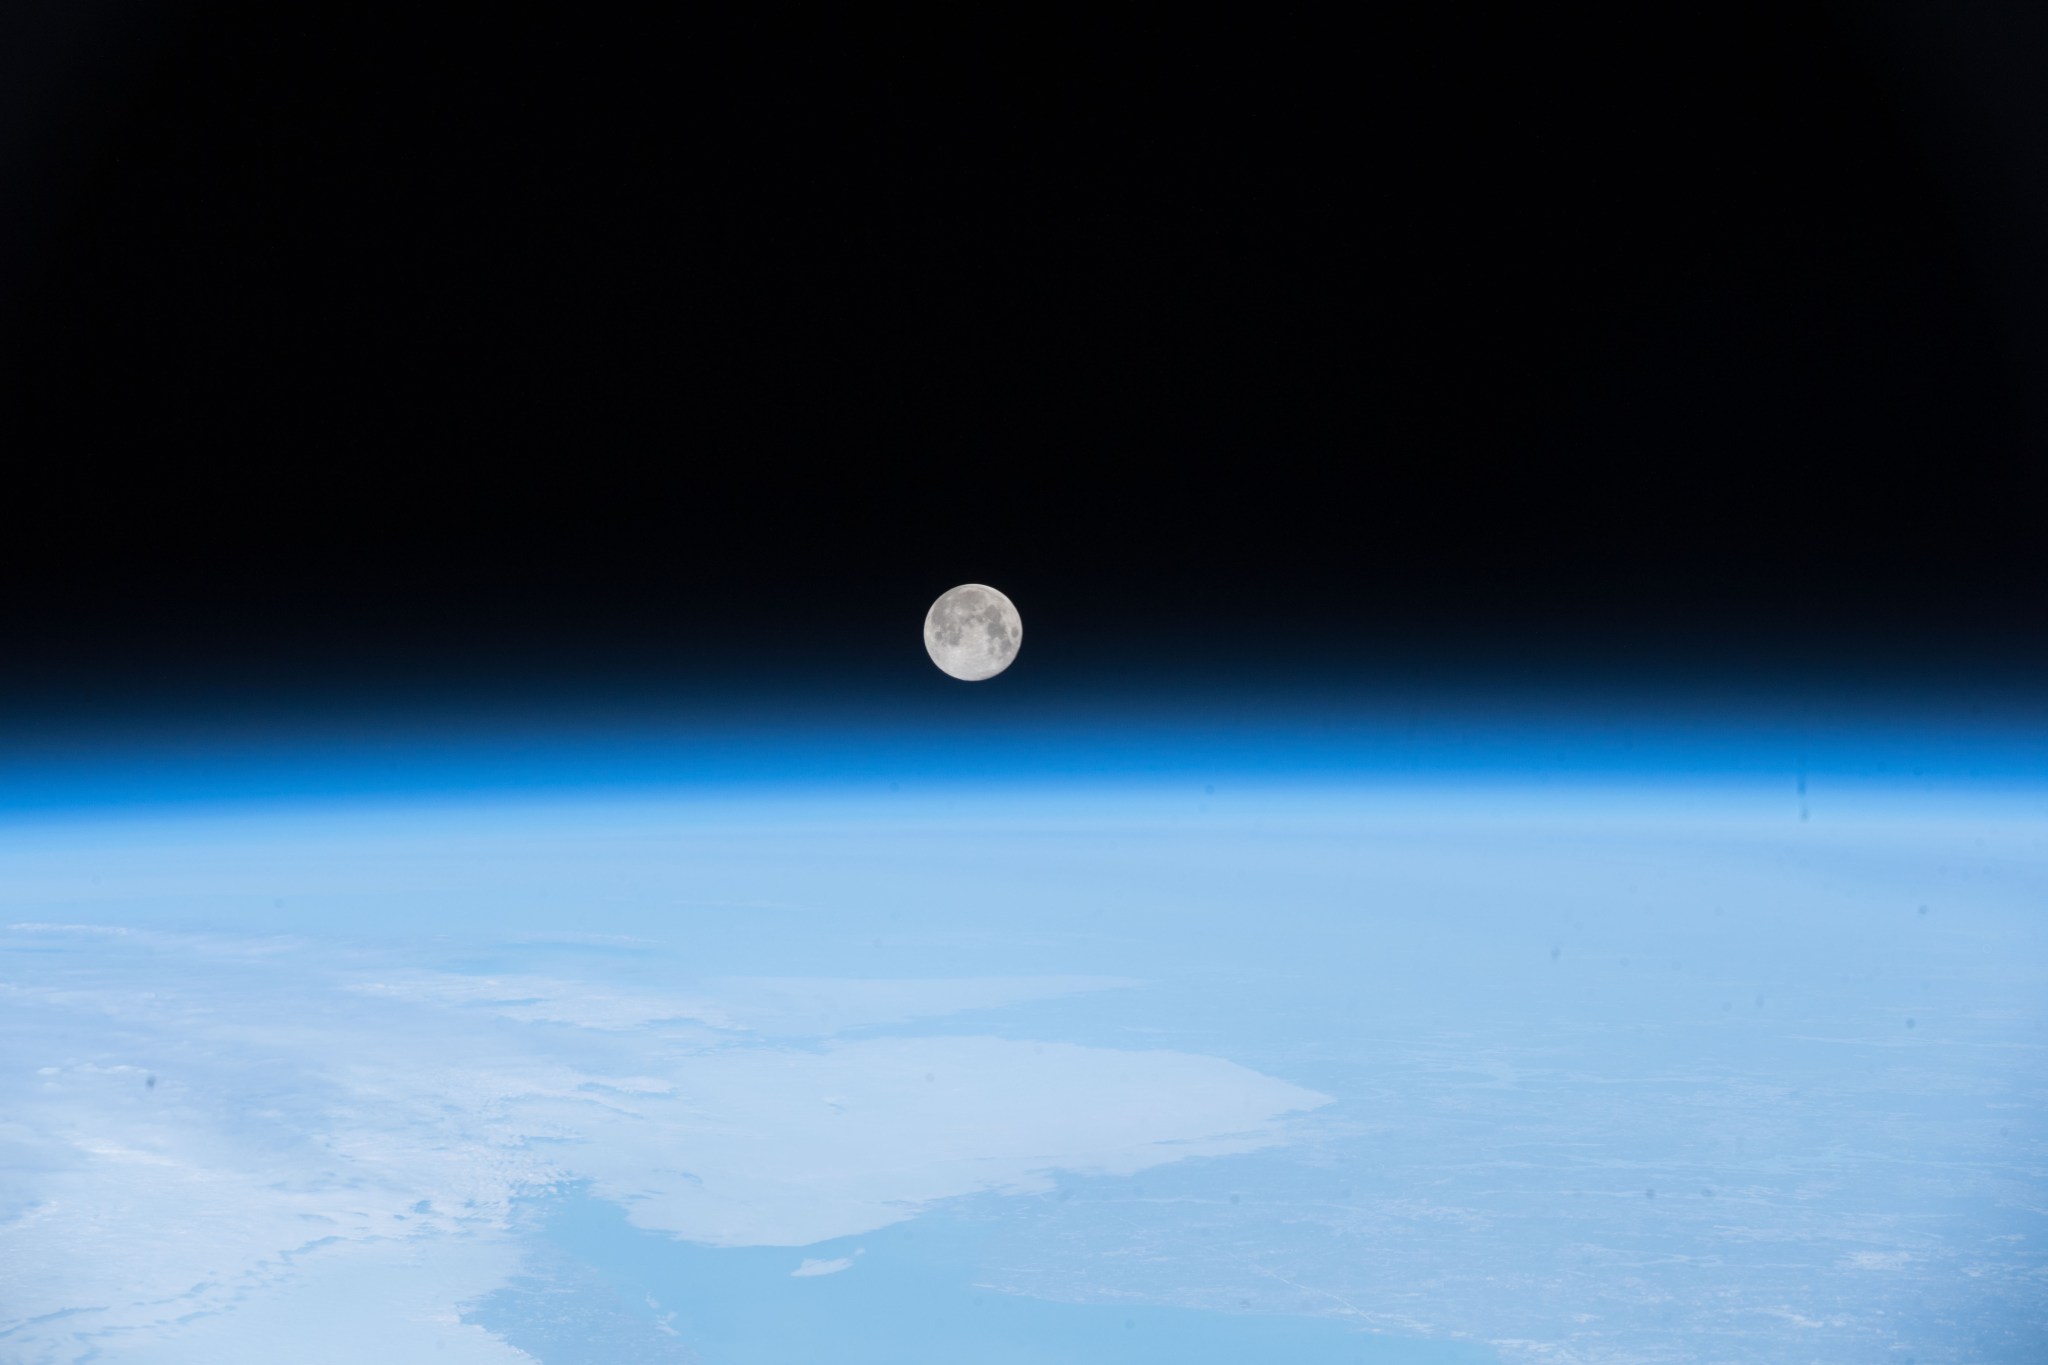 The Moon, a silvery white globe, floats above the diffuse blue atmosphere of Earth, which curves gently across the image, cutting it in half. The top half is the black of space.